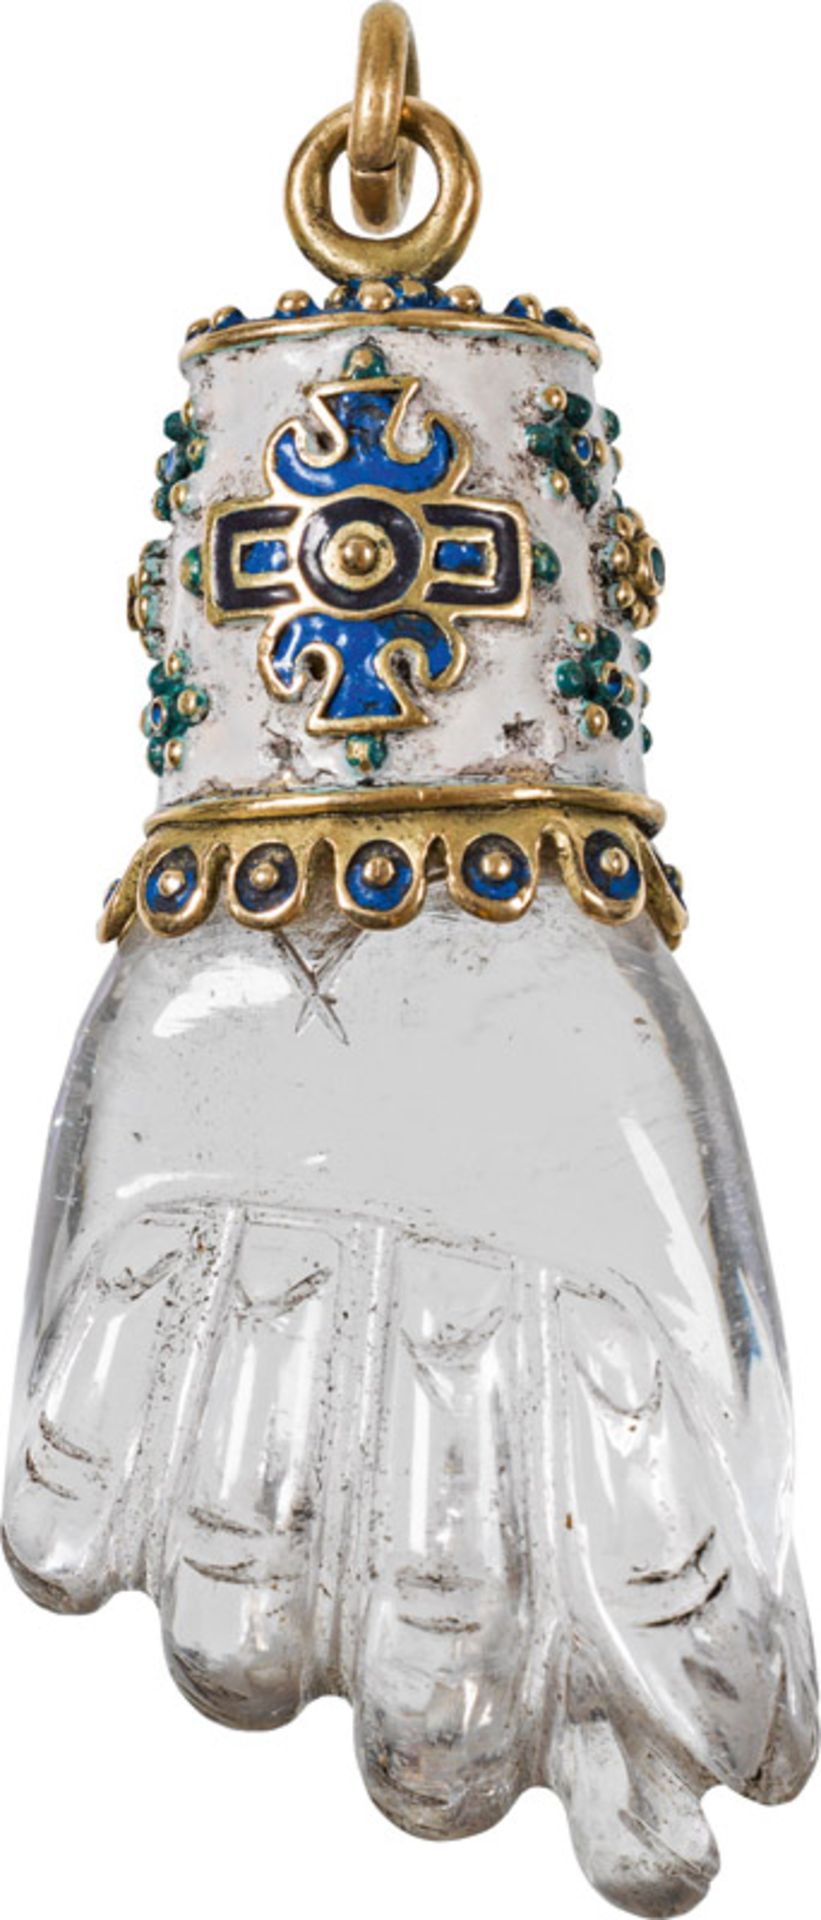 "Neidfeige", South German, 17th/18th century rock crystal, silver, gilded, partly enamelled; l. 7.